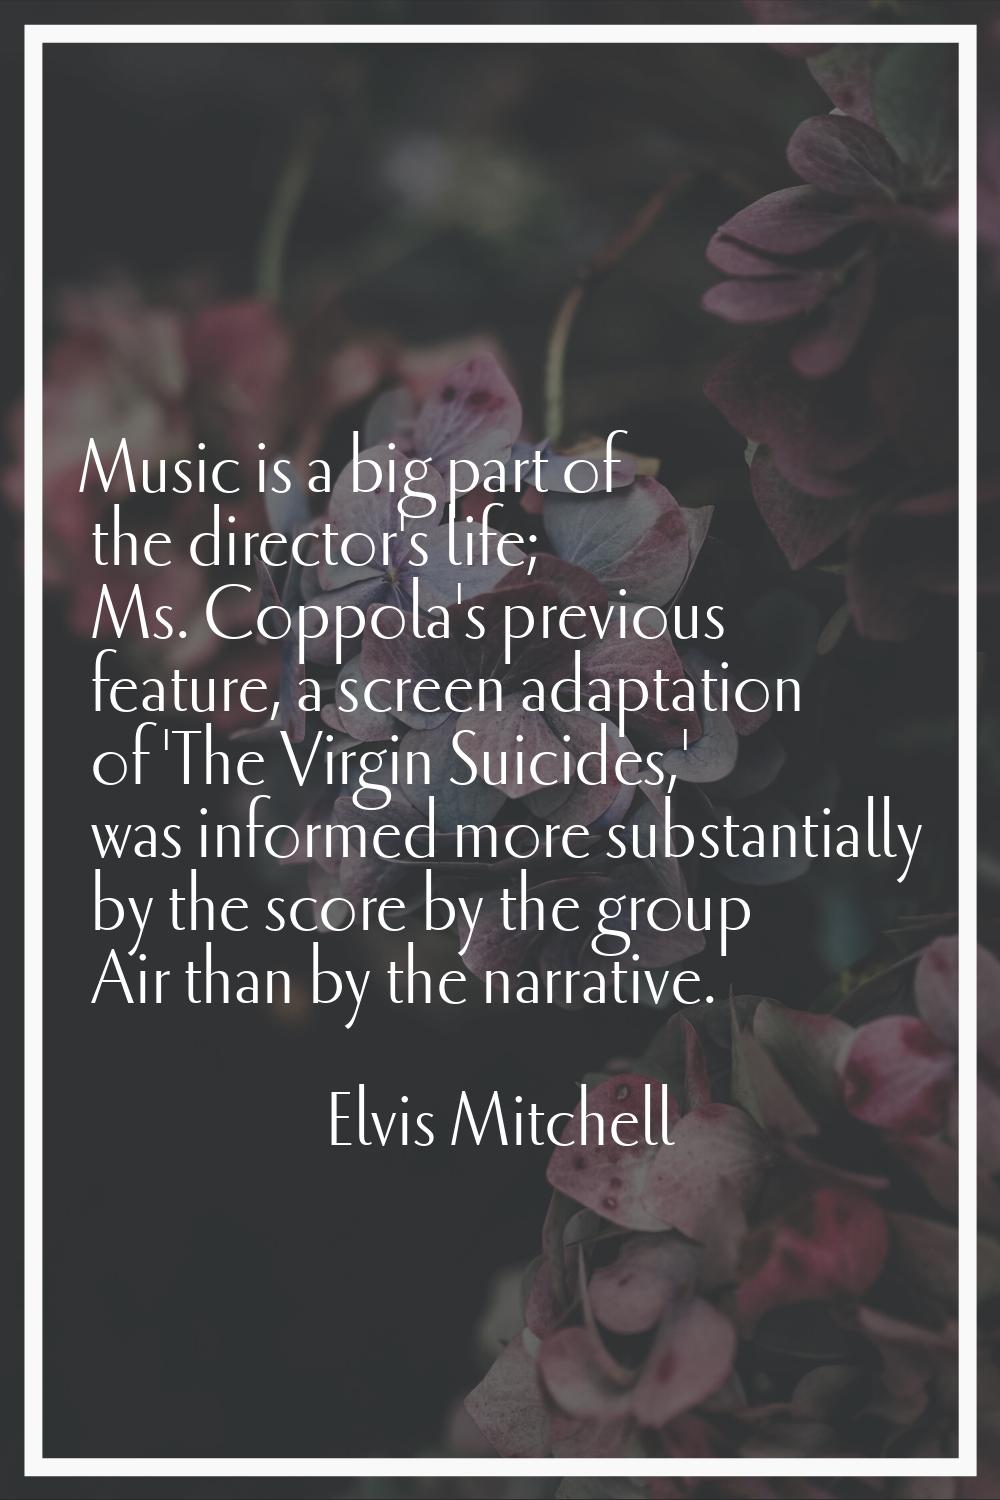 Music is a big part of the director's life; Ms. Coppola's previous feature, a screen adaptation of 